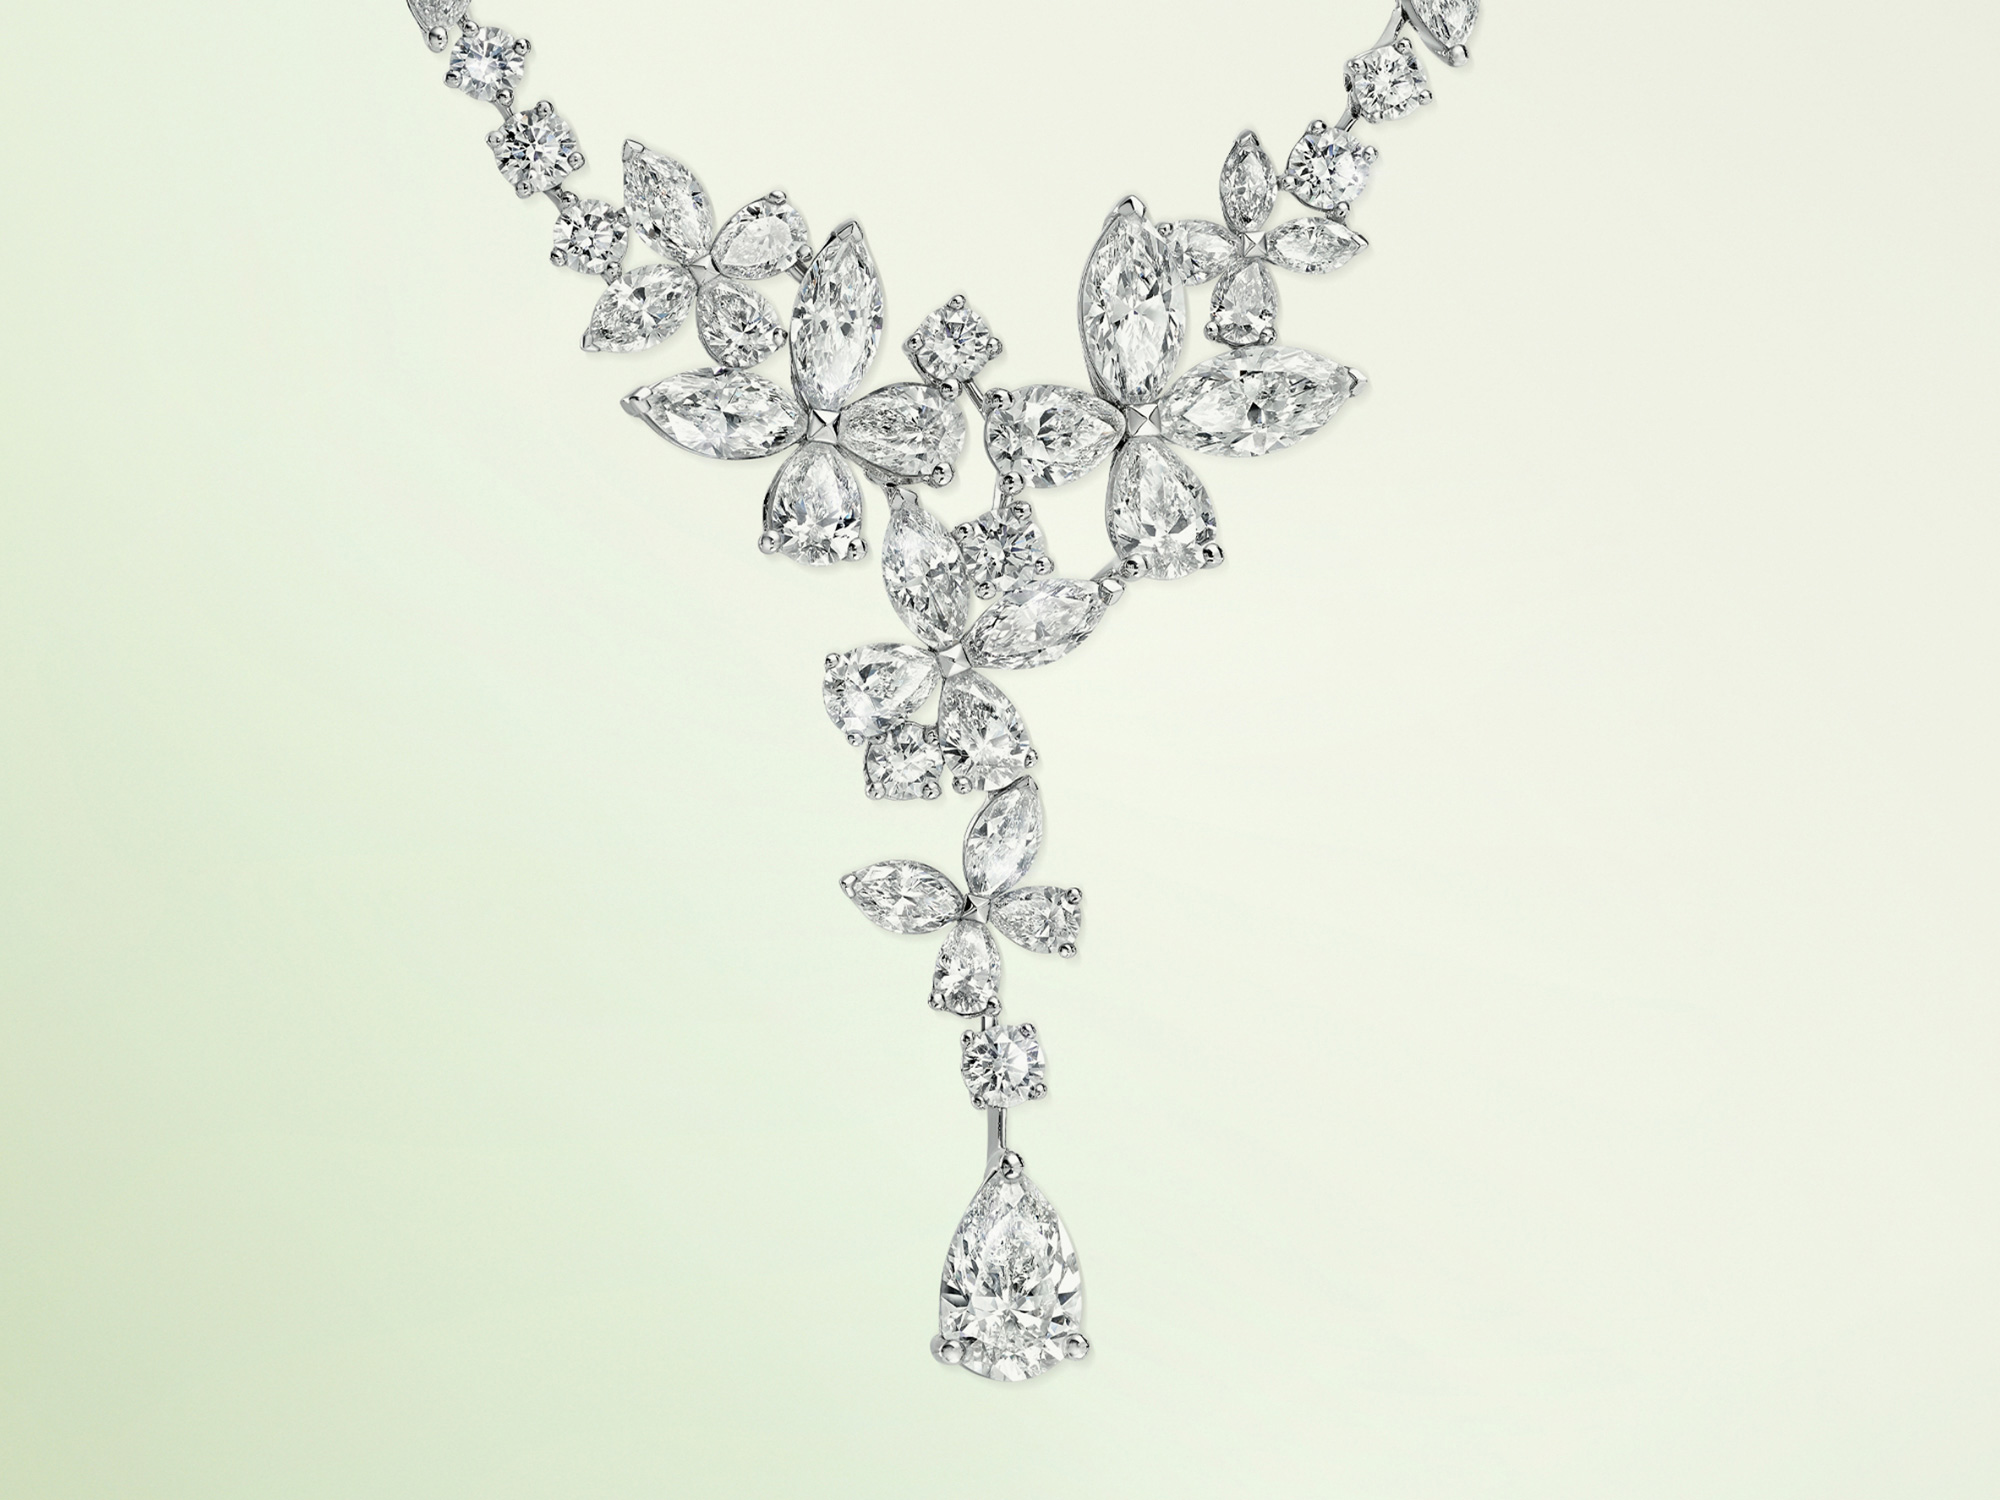 Graff Classic Butterfly Diamond Necklace from the Graff jewellery collection